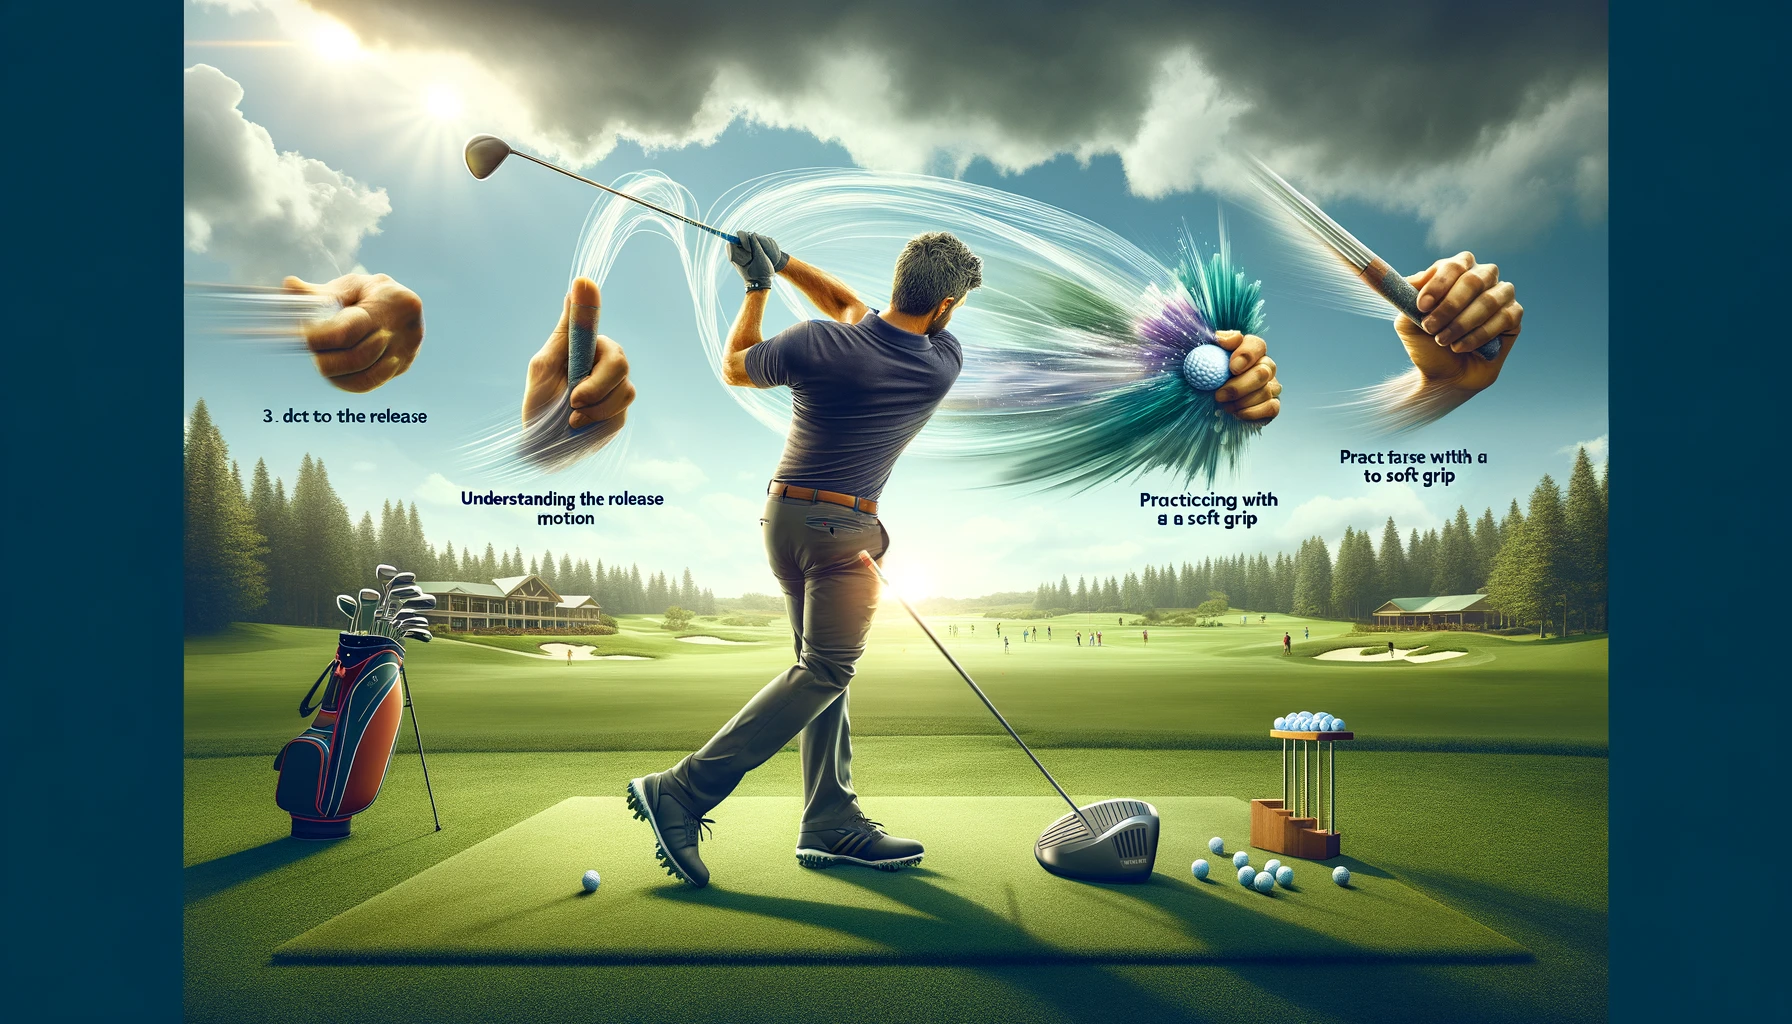 3 SIMPLE TIPS TO NAIL THE RELEASE IN THE GOLF SWING